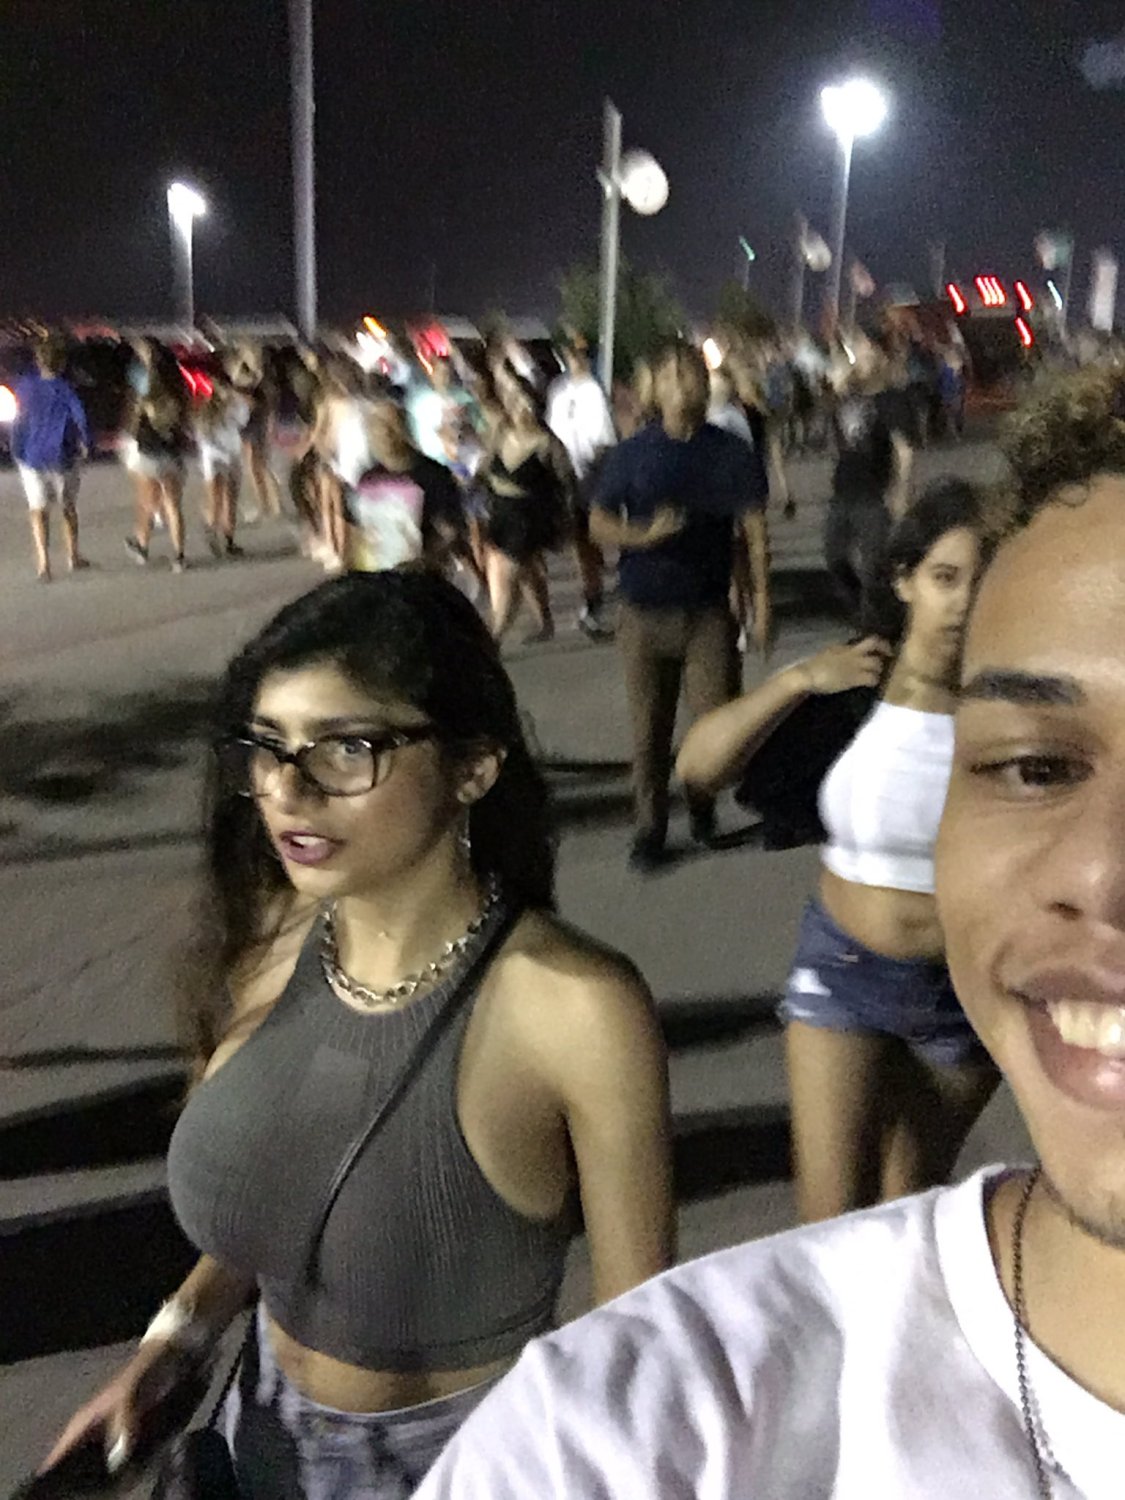 mia khalifa trolled for punching a fan who took selfie, mia responded to trolls